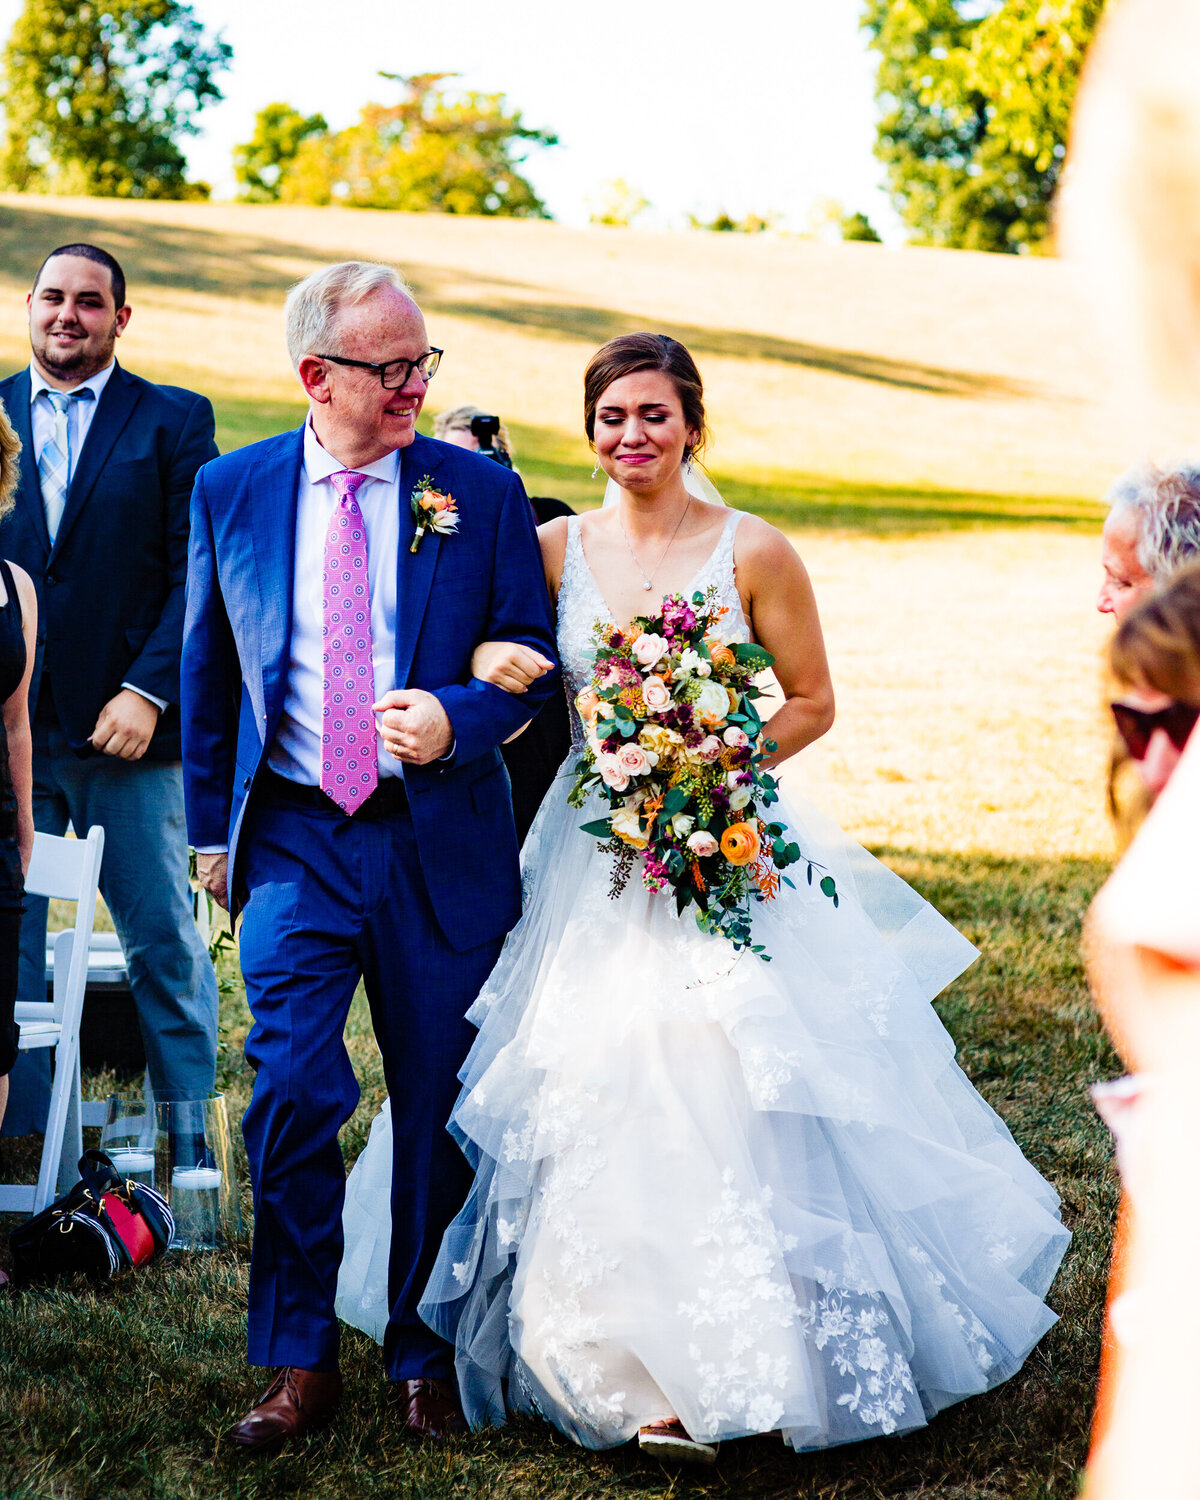 One of the top wedding photos of 2020. Taken by Adore Wedding Photography- Toledo, Ohio Wedding Photographers. This photo is of a bride crying as her father walks her down the aisle at Nazareth Hall in Toledo Ohio